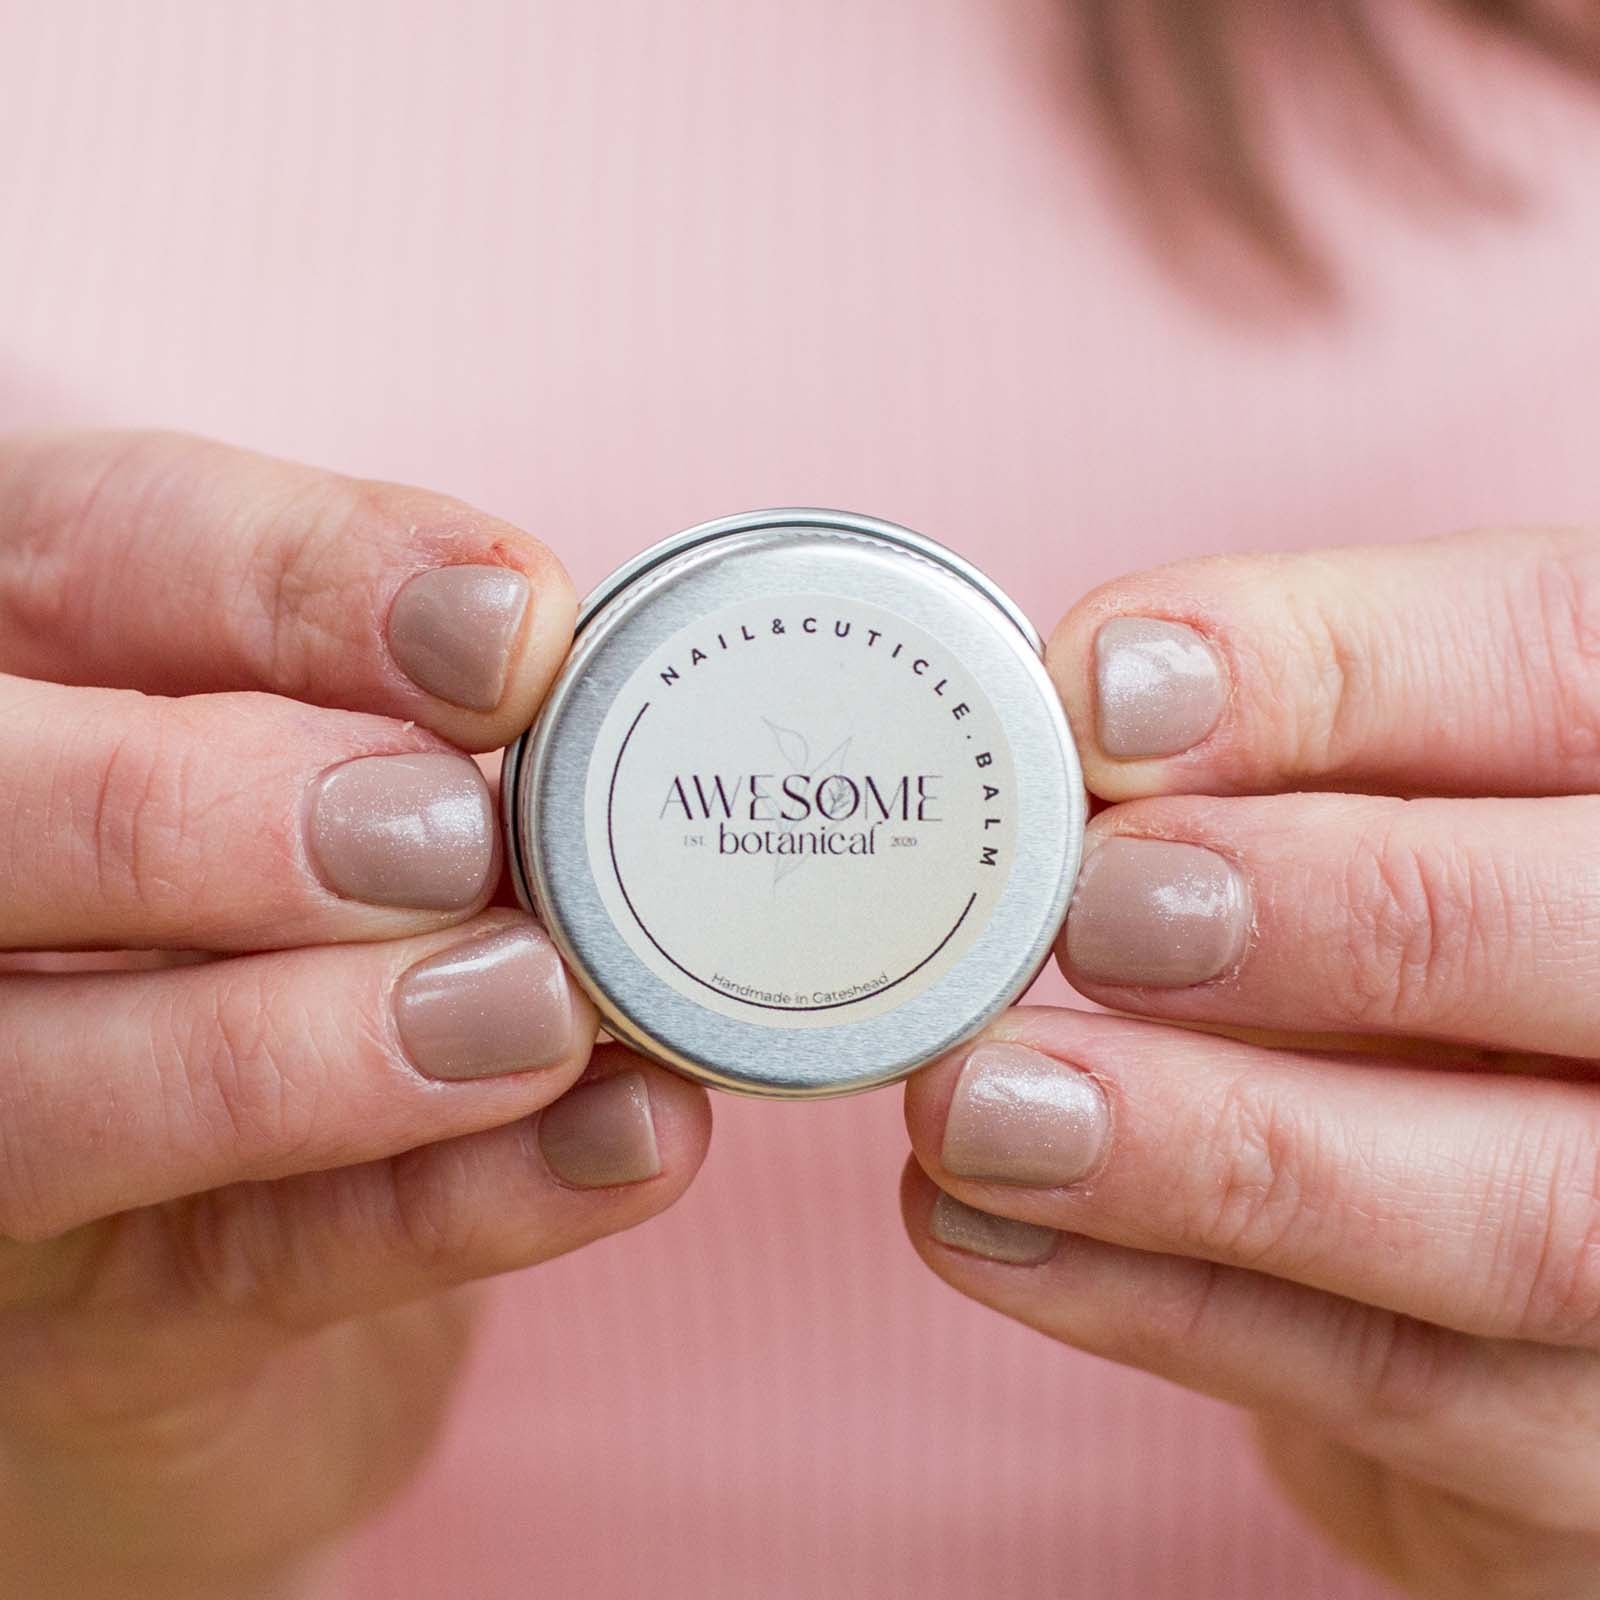 Nail &amp; cuticle balm in hands